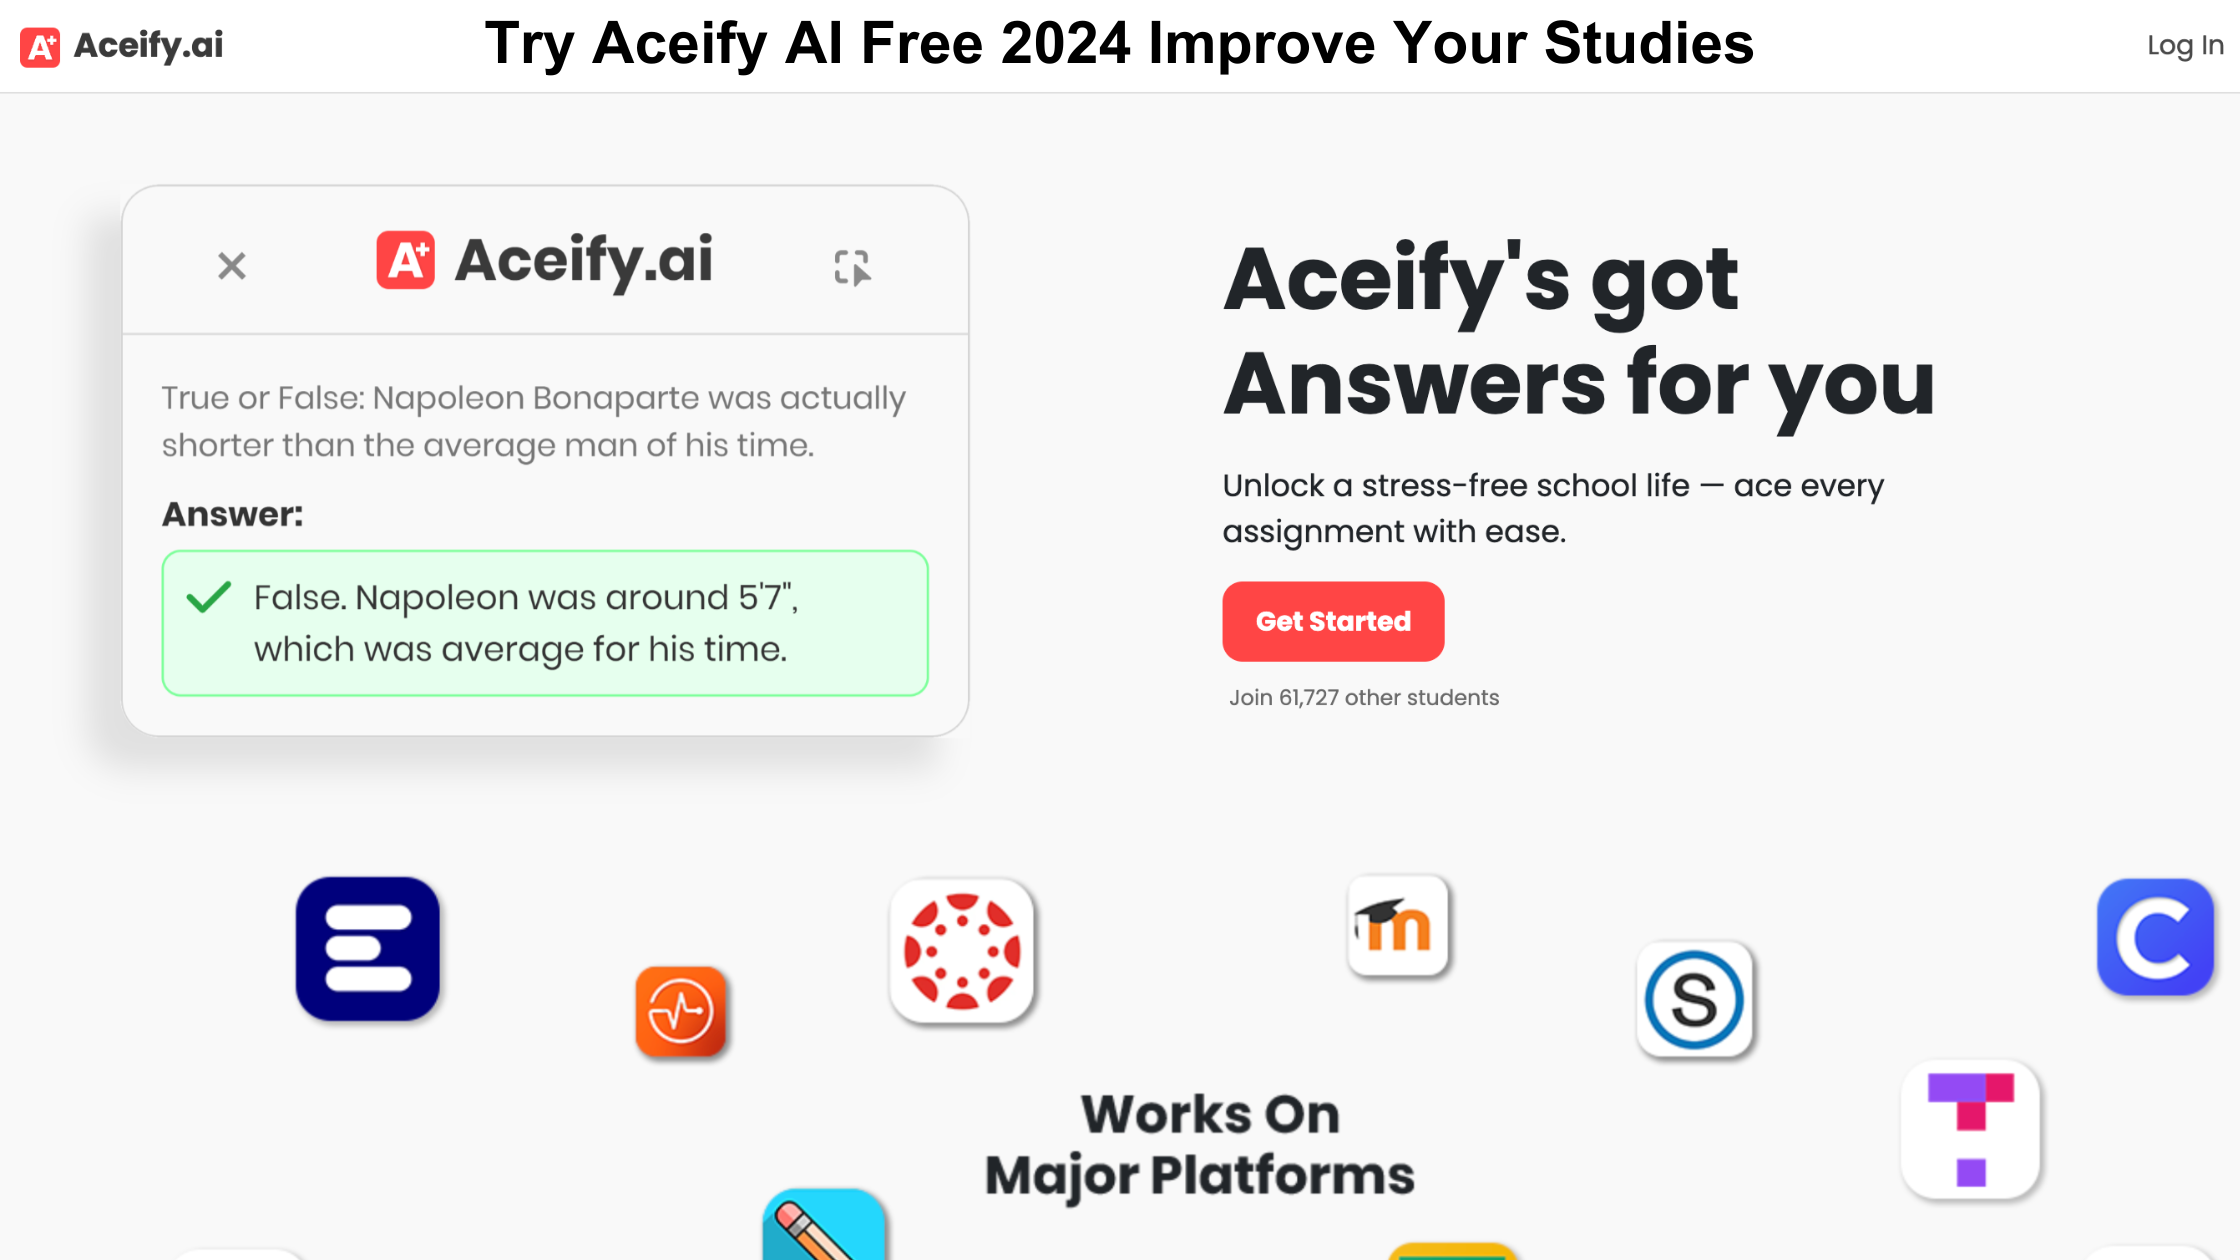 Try Aceify AI Free 2024 Improve Your Studies